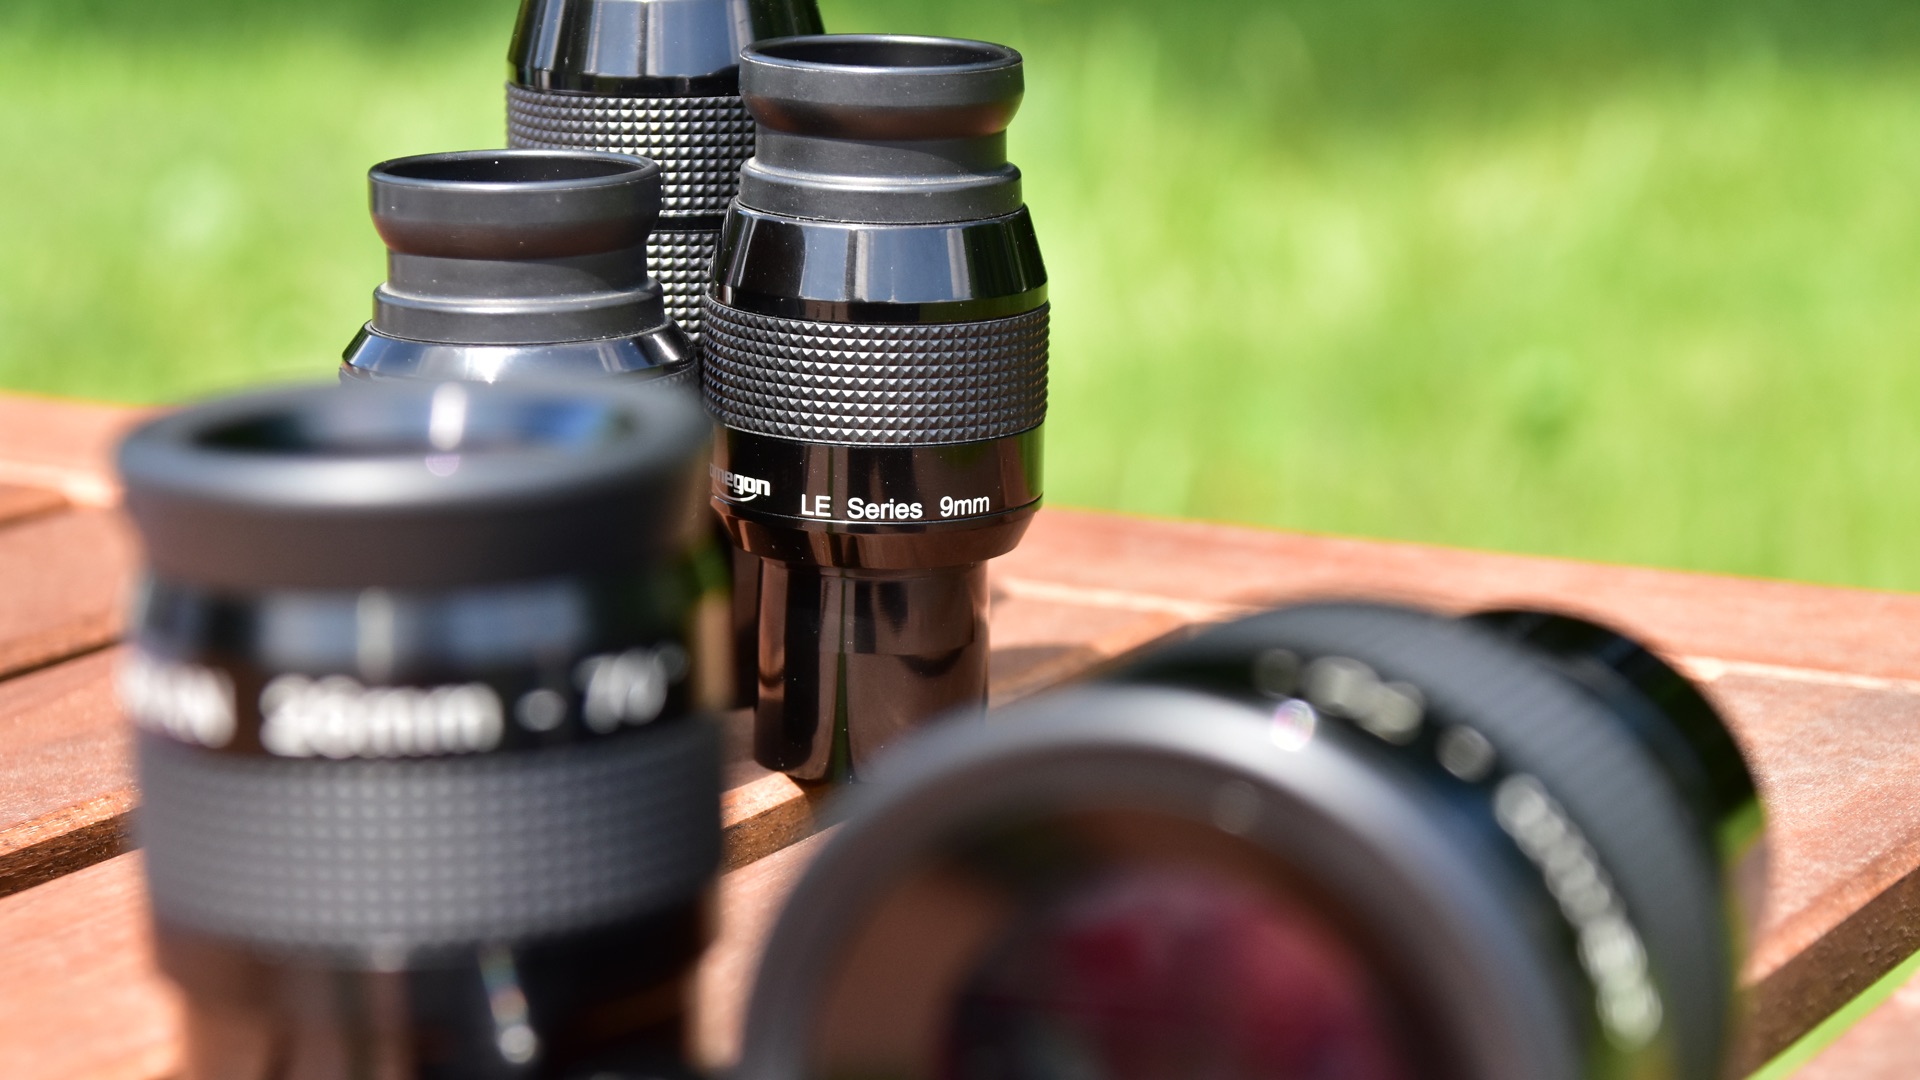 The selection of astronomical eyepieces can be very confusing. Experts recommend the best eyepieces for your telescope.